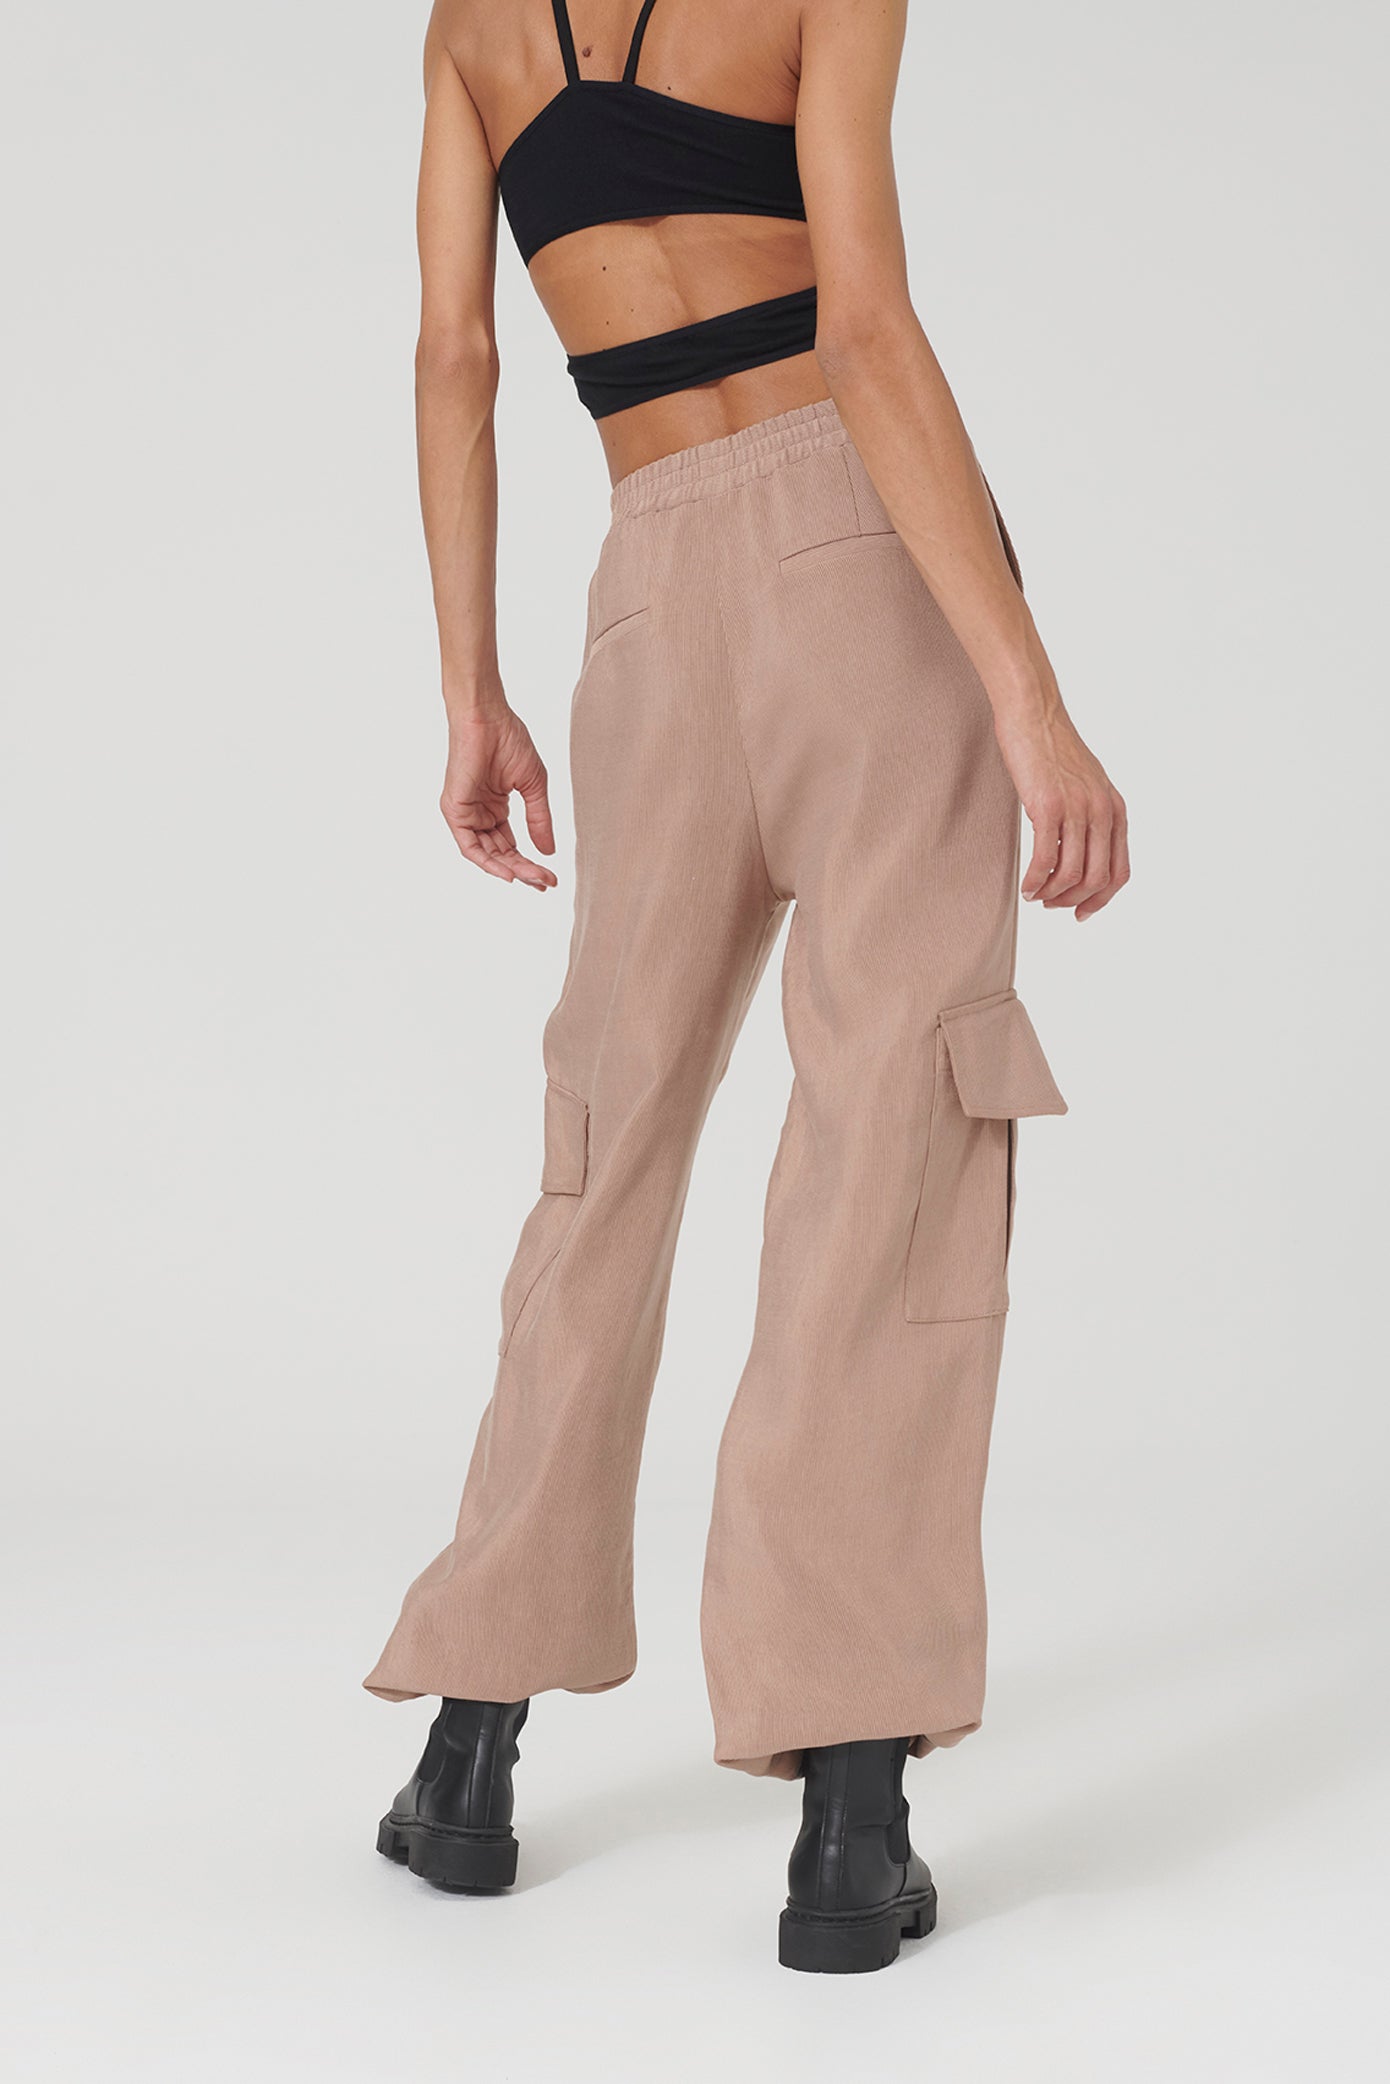 HEDIE rose-colored trousers by LOVJOI made of Ecovero™